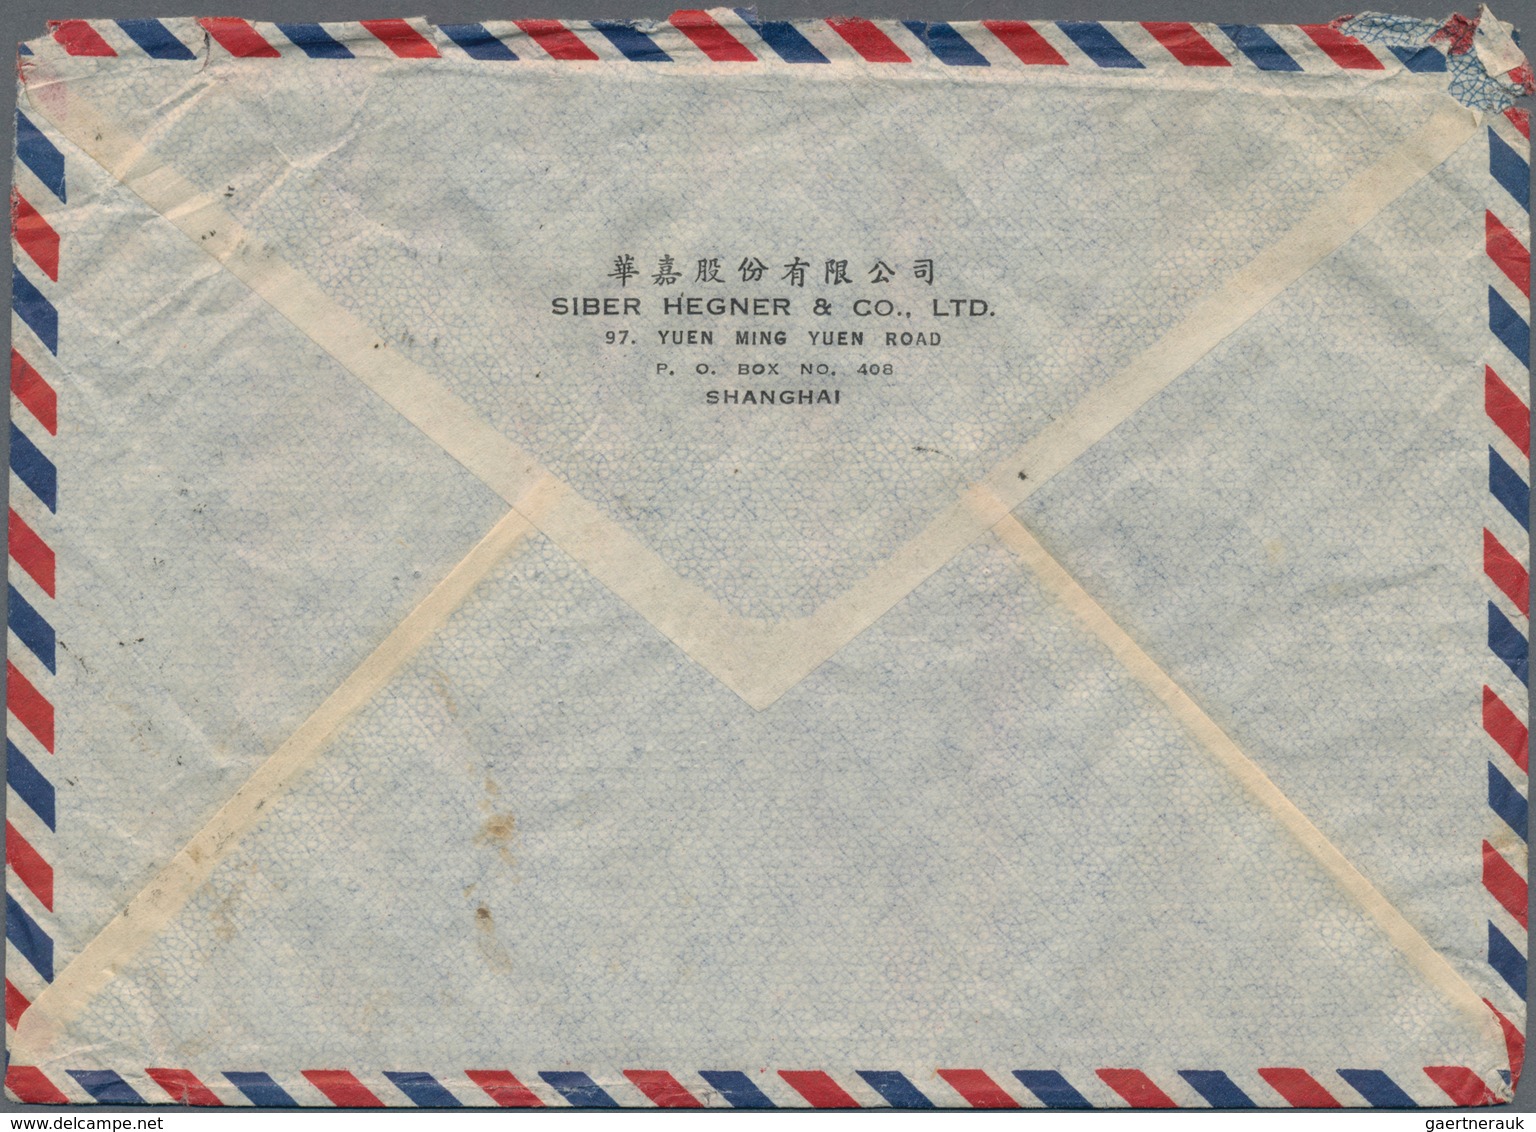 China - Volksrepublik: 1950/51, Tien AnMen issues up to $20.000 on covers (airmails x6 + surface fro